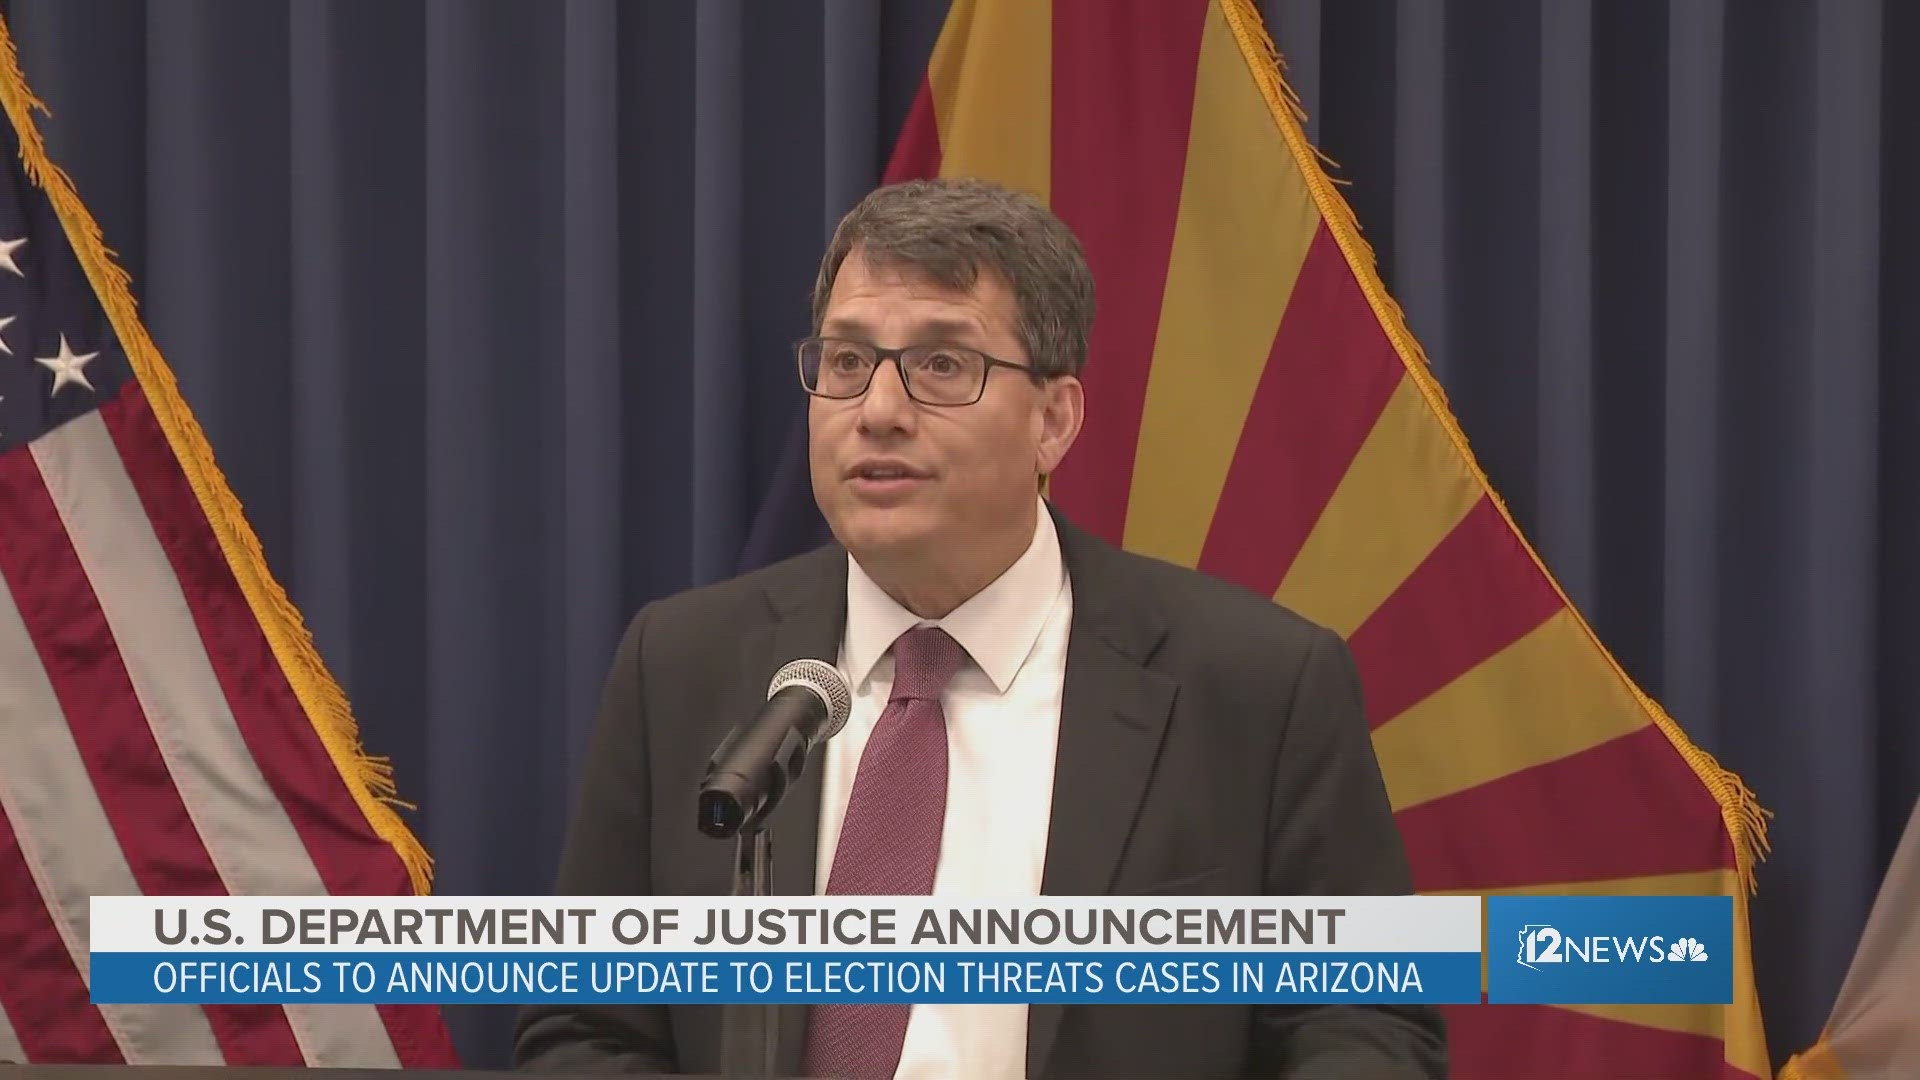 Federal and government officials gathered Monday to discuss efforts to protect members of the election community in Arizona. Here's the announcement news conference.